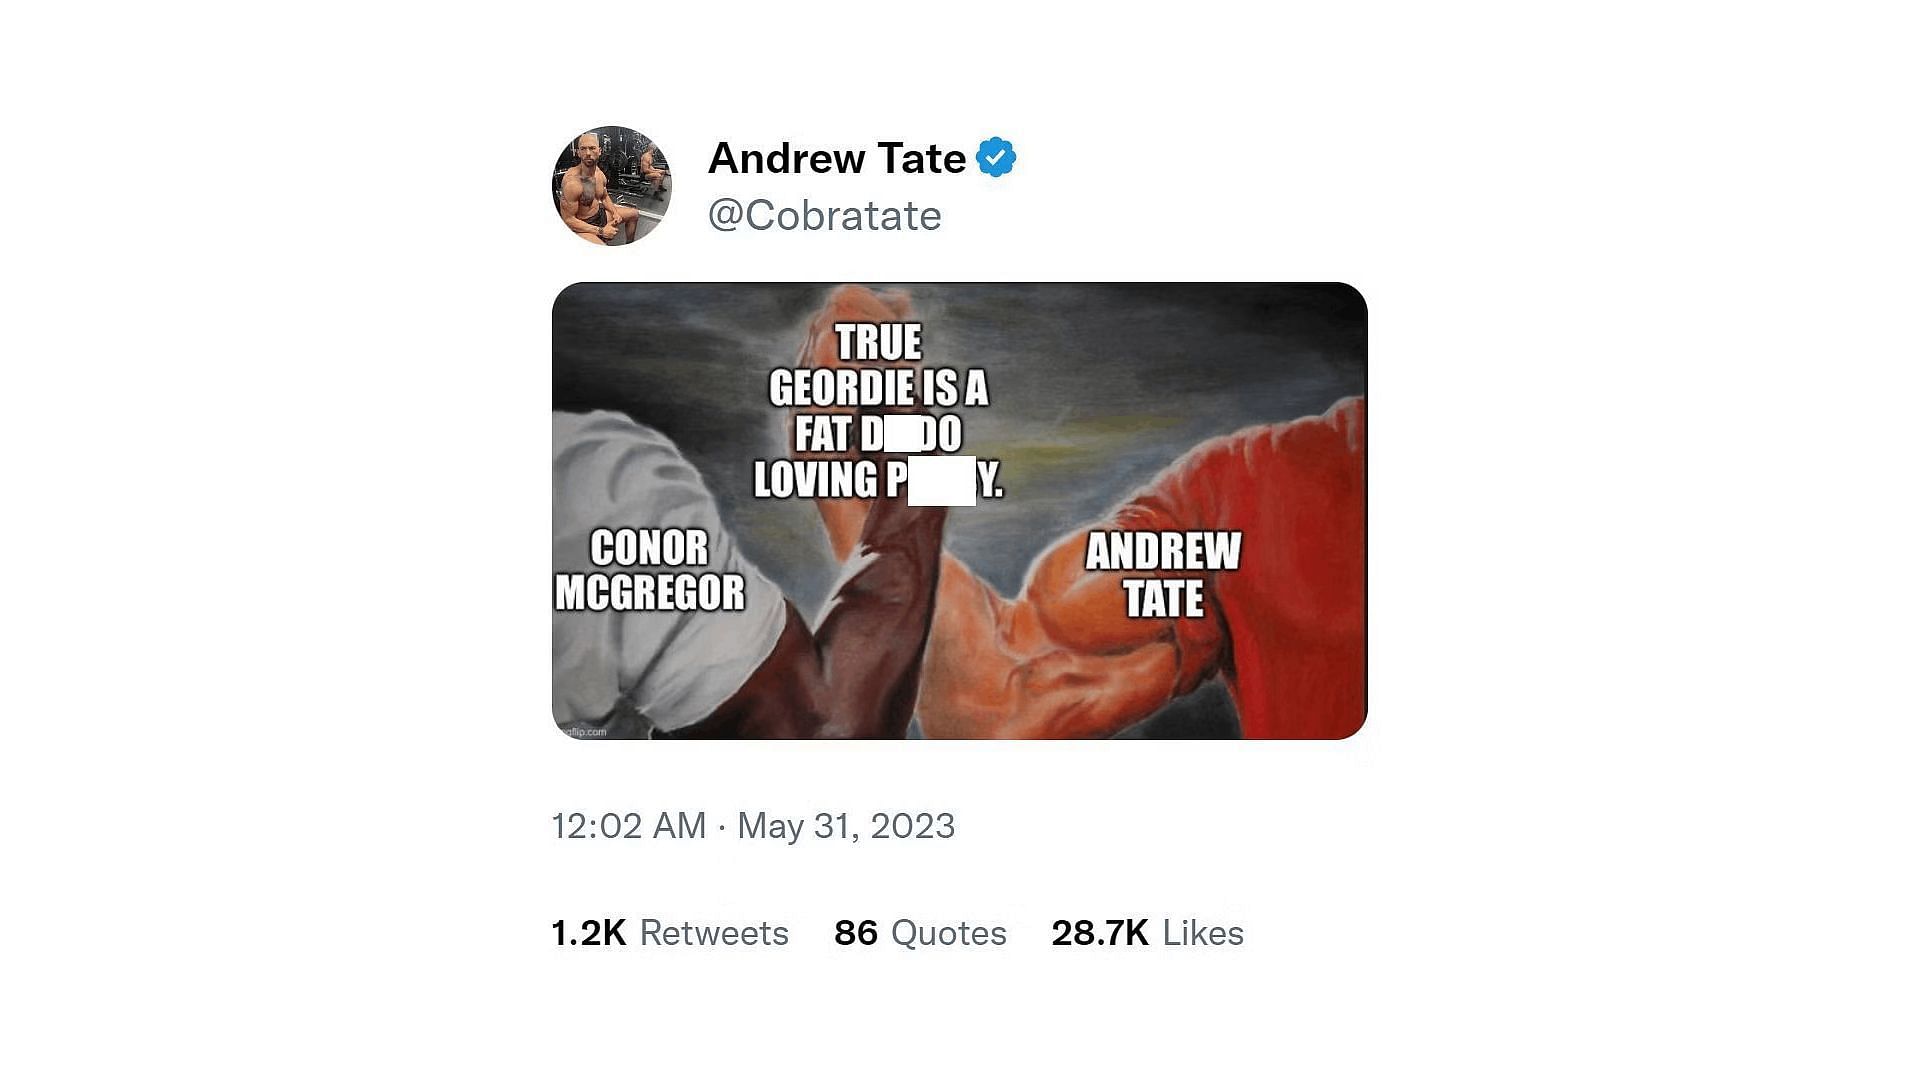 Andrew posted a meme against the content creator (Image via Cobratate/Twitter)